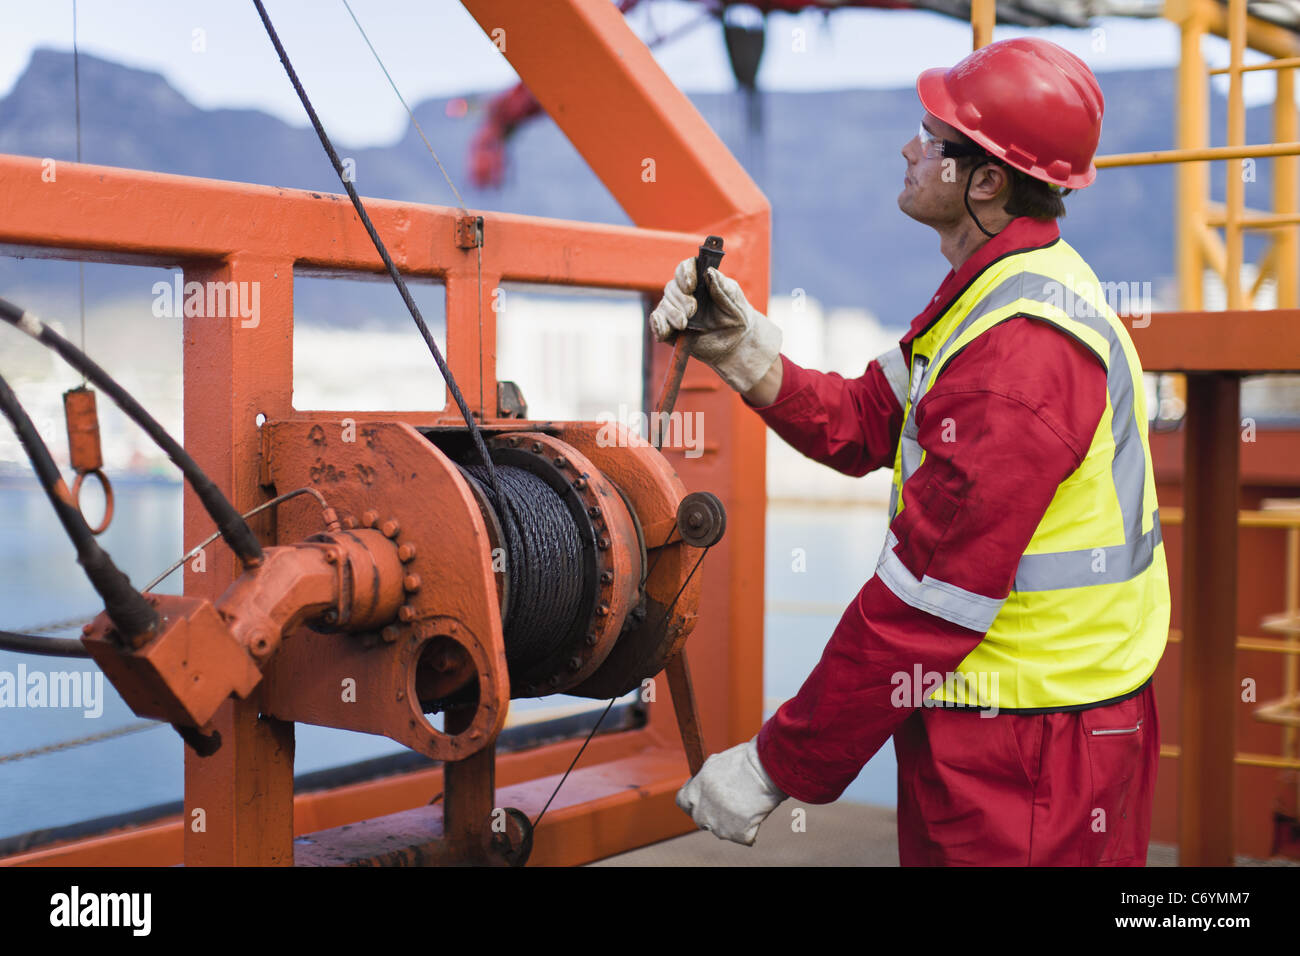 Worker spooling cord on oil rig Stock Photo